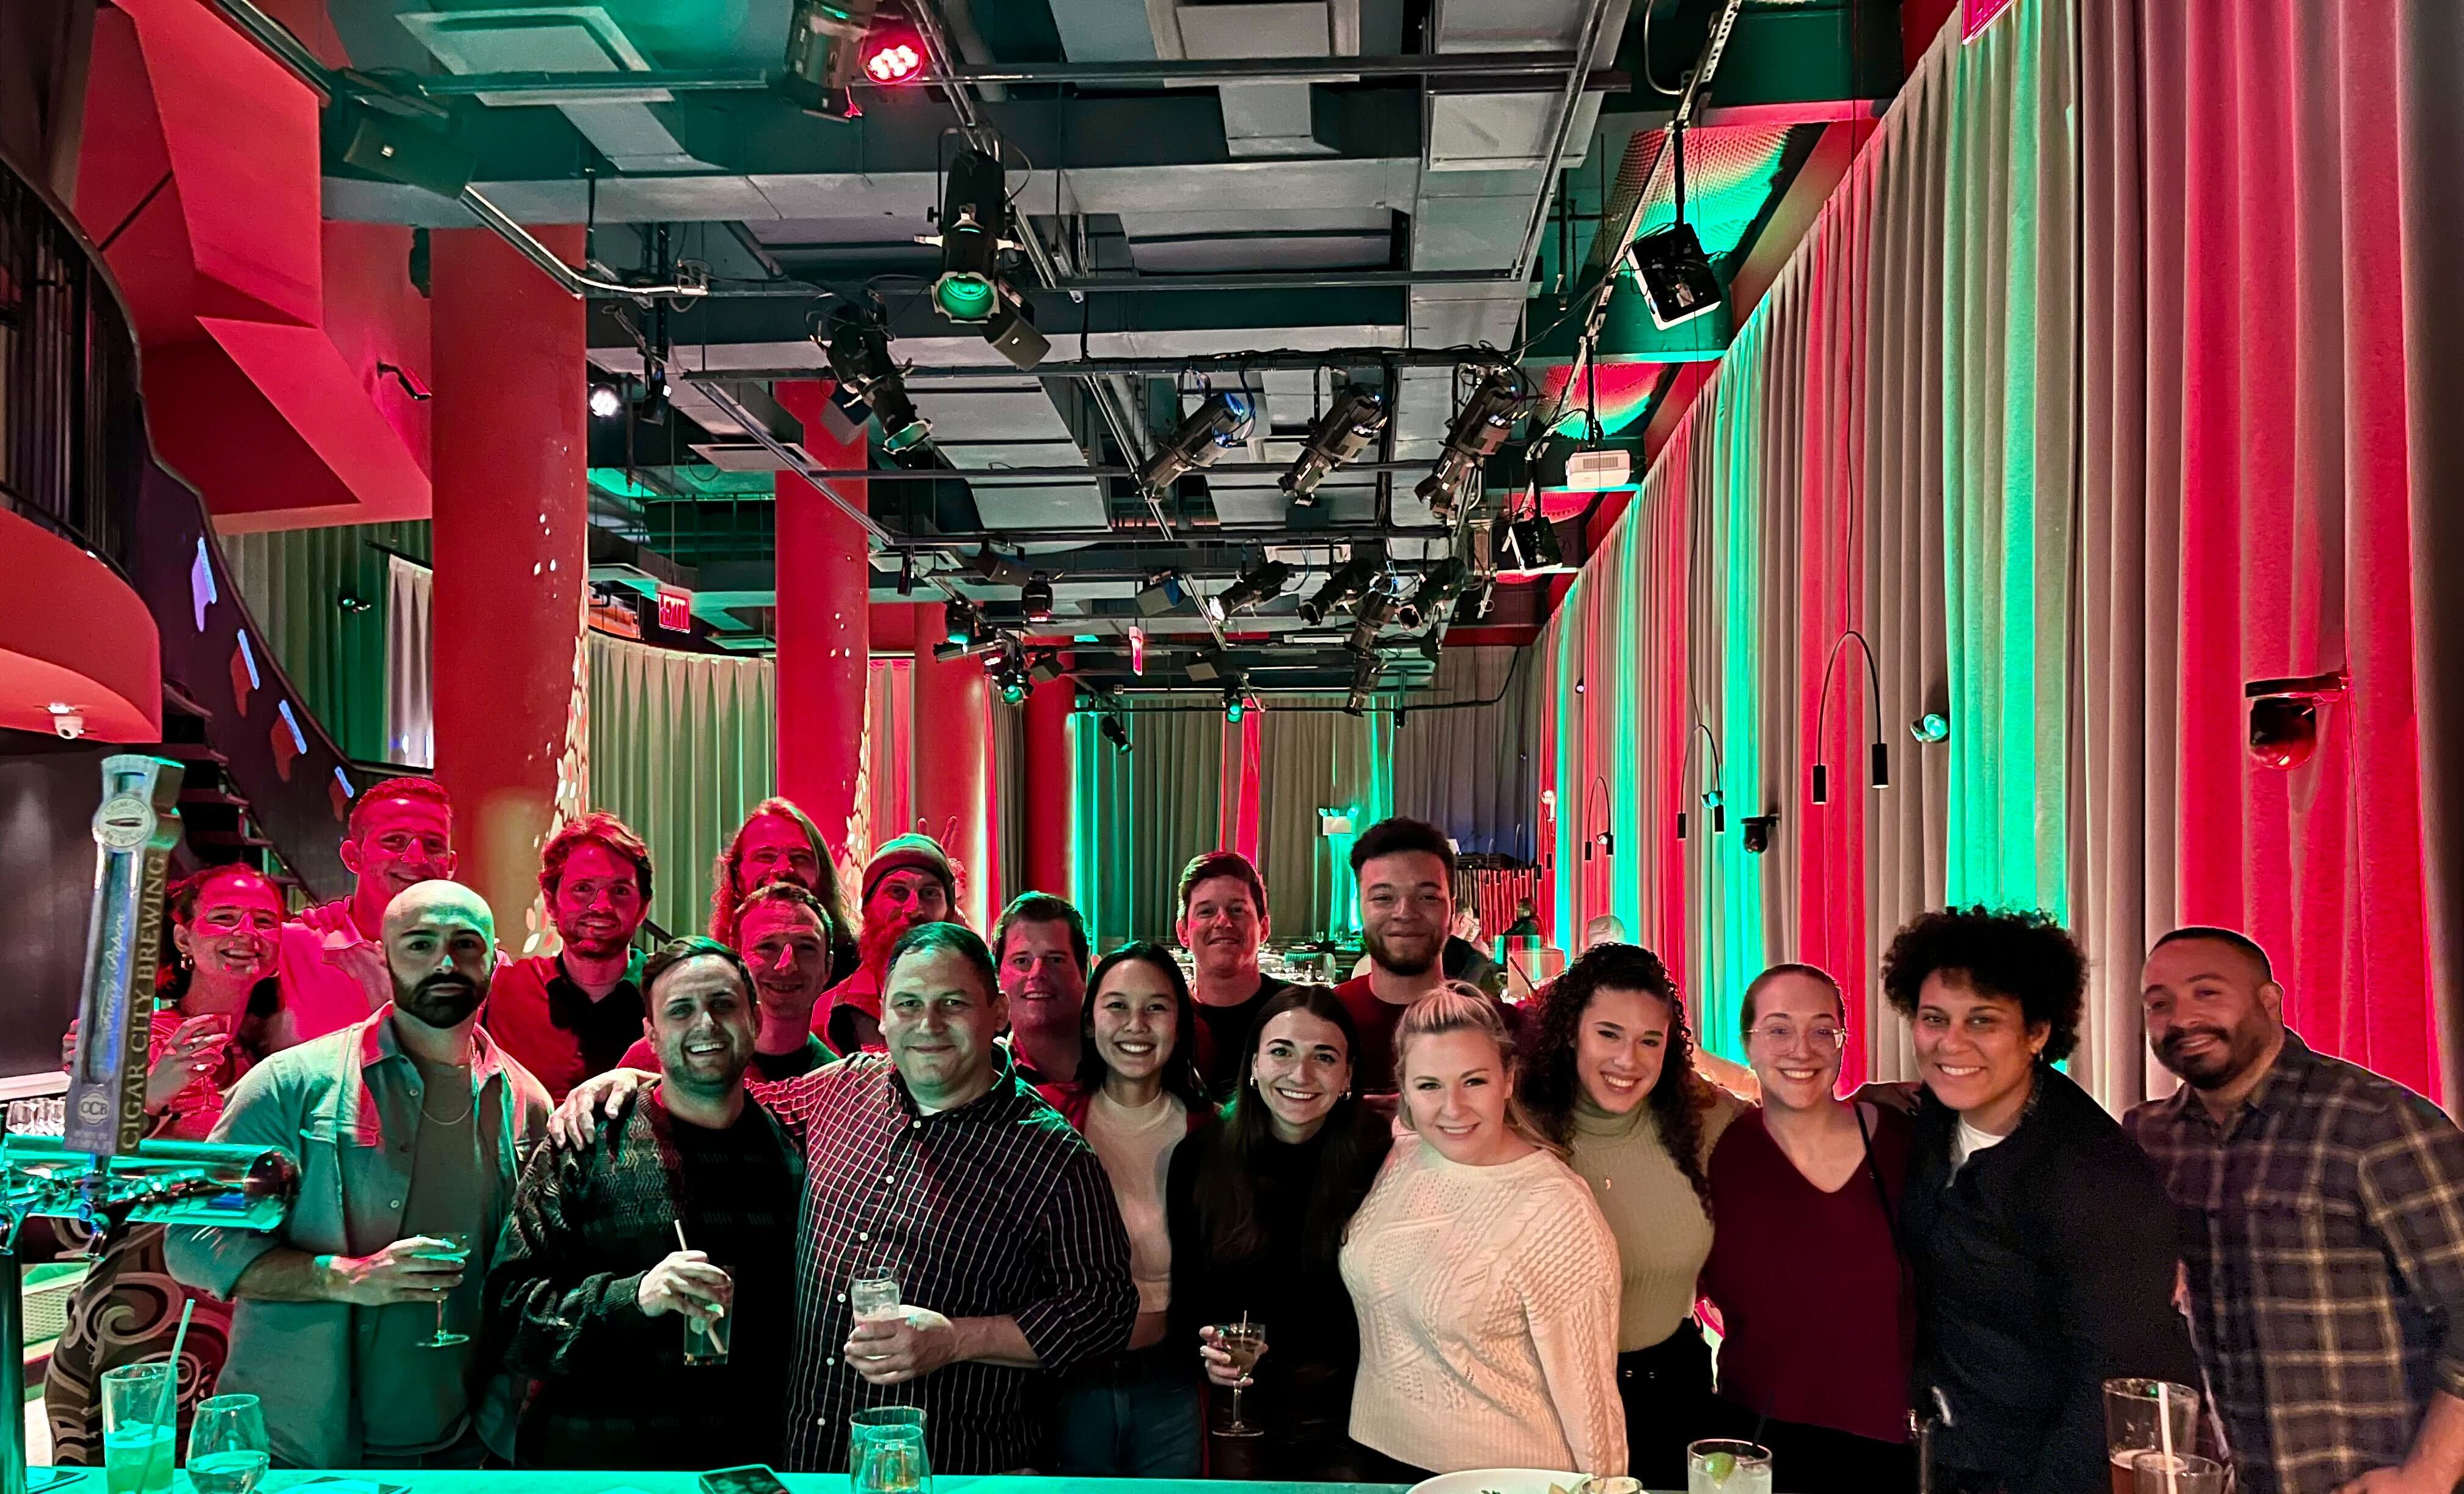 The Instawork team at a party lit with red and green light